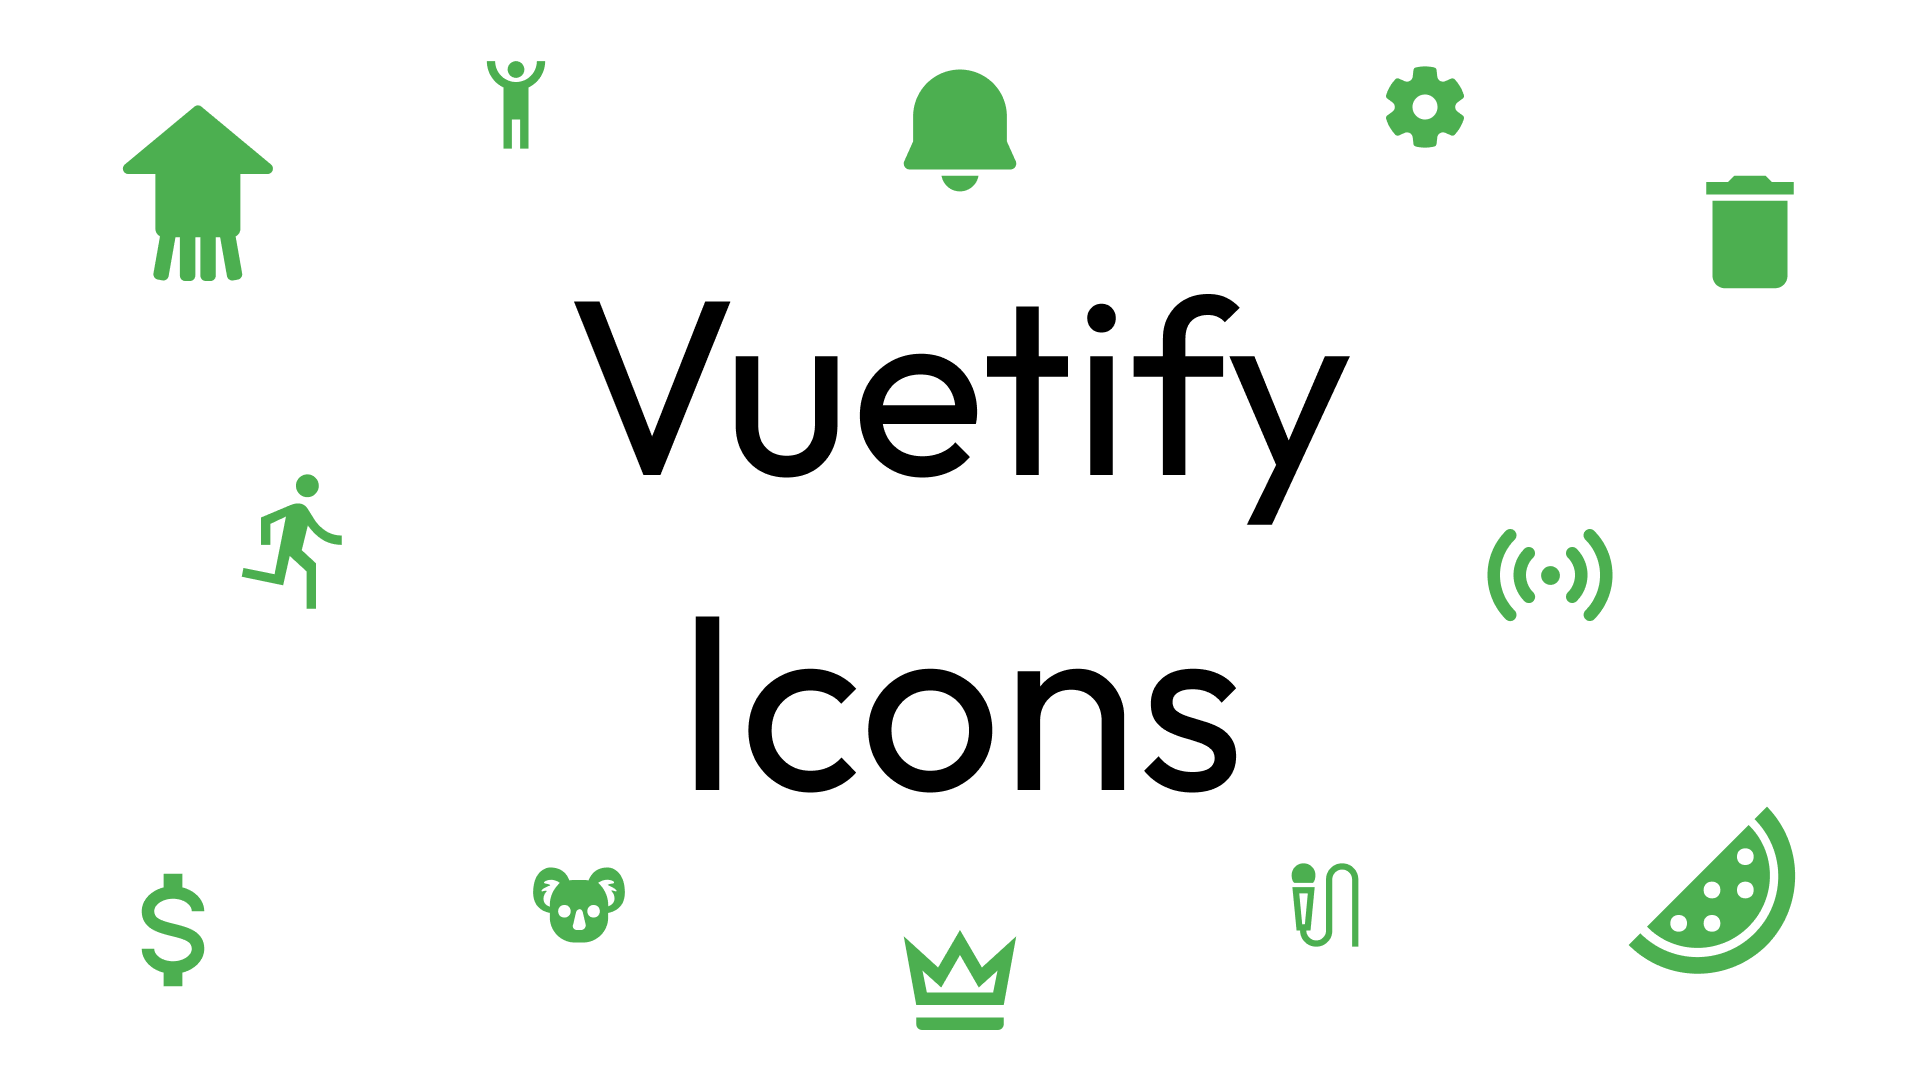 azblob://2022/11/18/eyecatch/2022-11-14-vuetify-icons-000.png